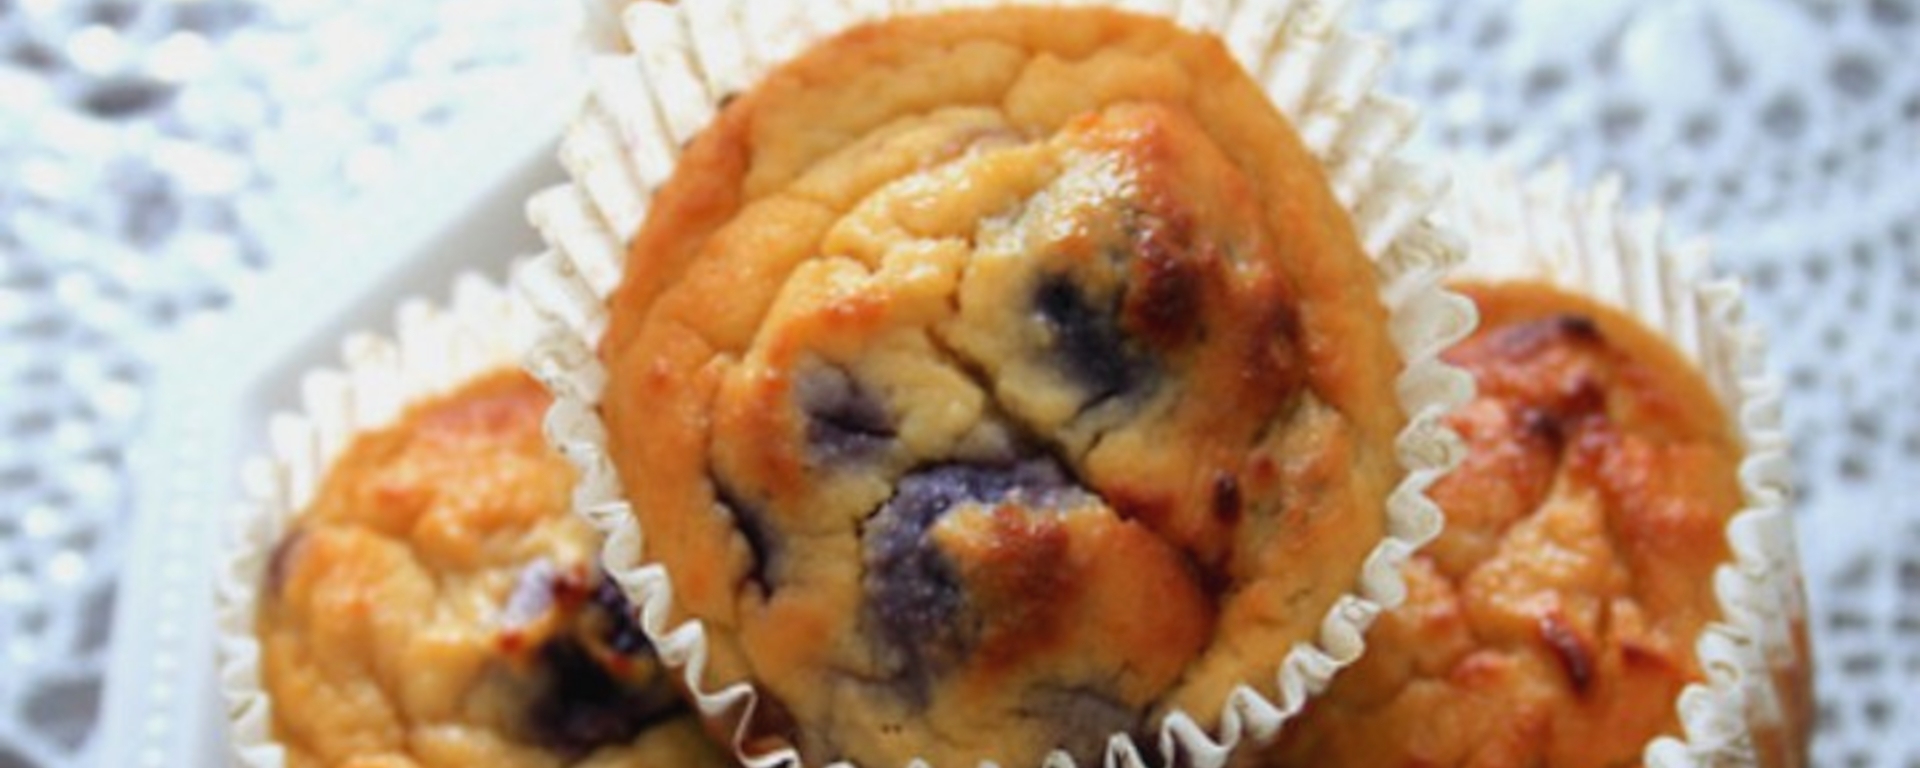 LuvMyRecipe.com - Blueberry Protein Cupcakes Featured